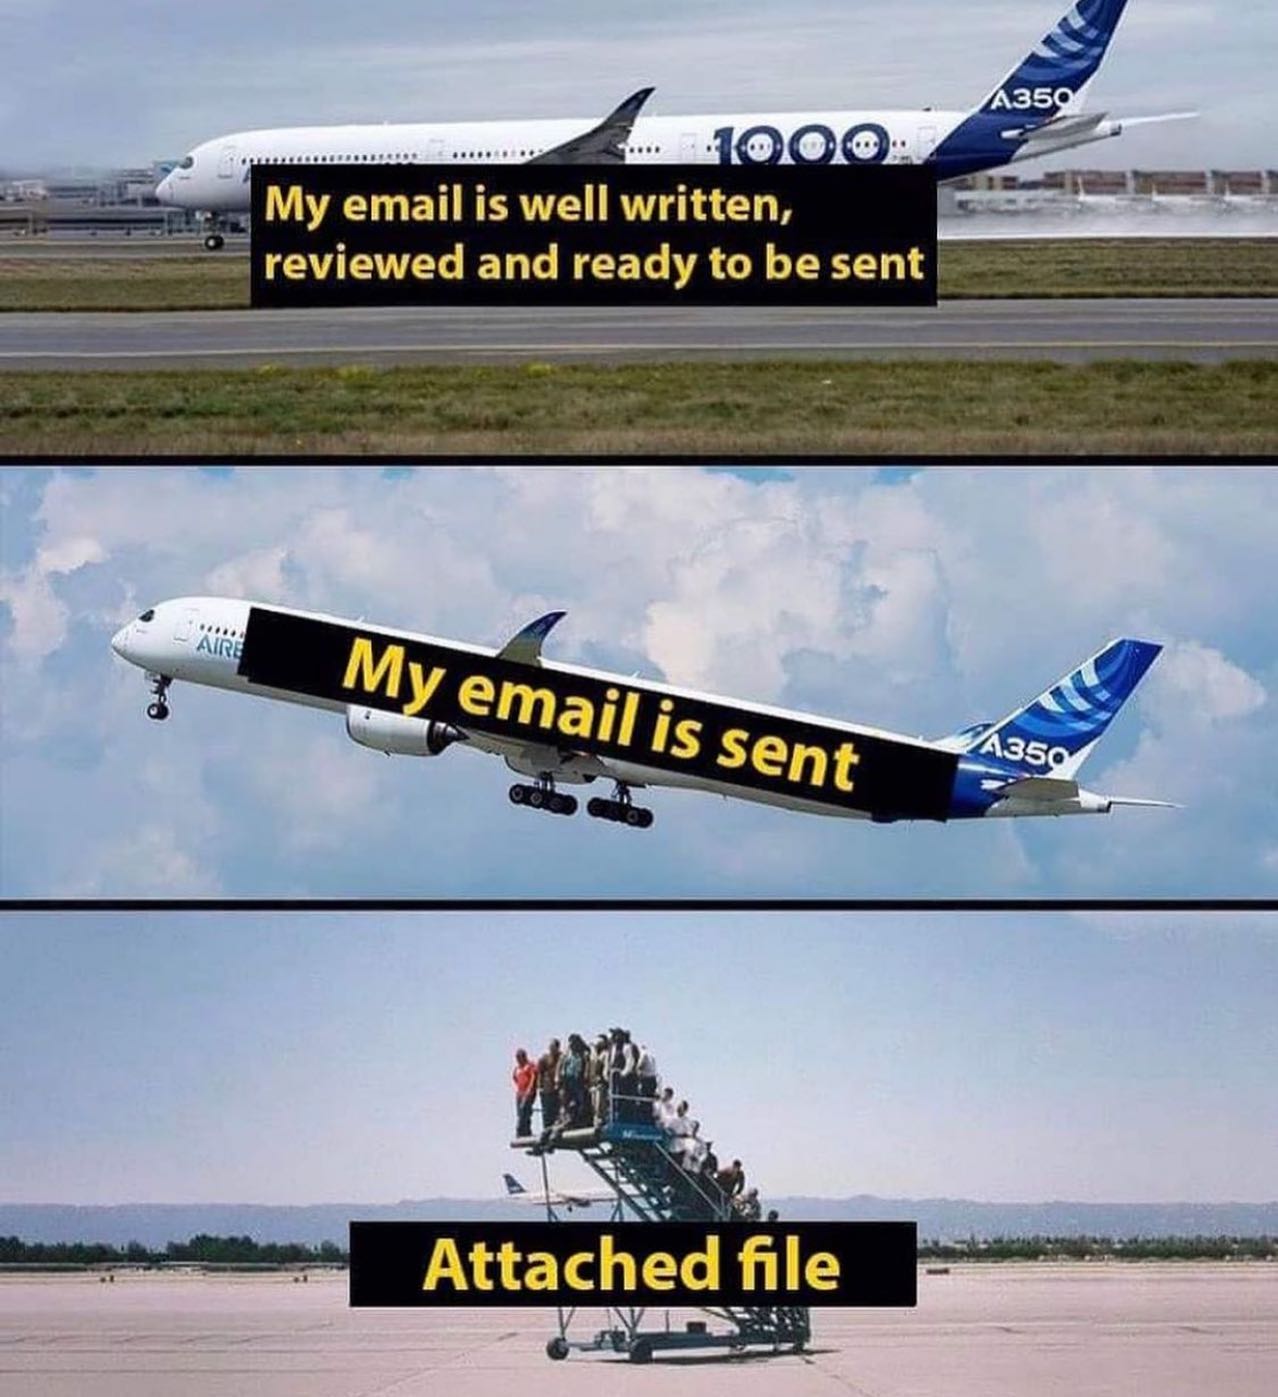 funny pics and randoms - plane email meme - Aire My email is well written, reviewed and ready to be sent My email is sent Attached file A350 A350